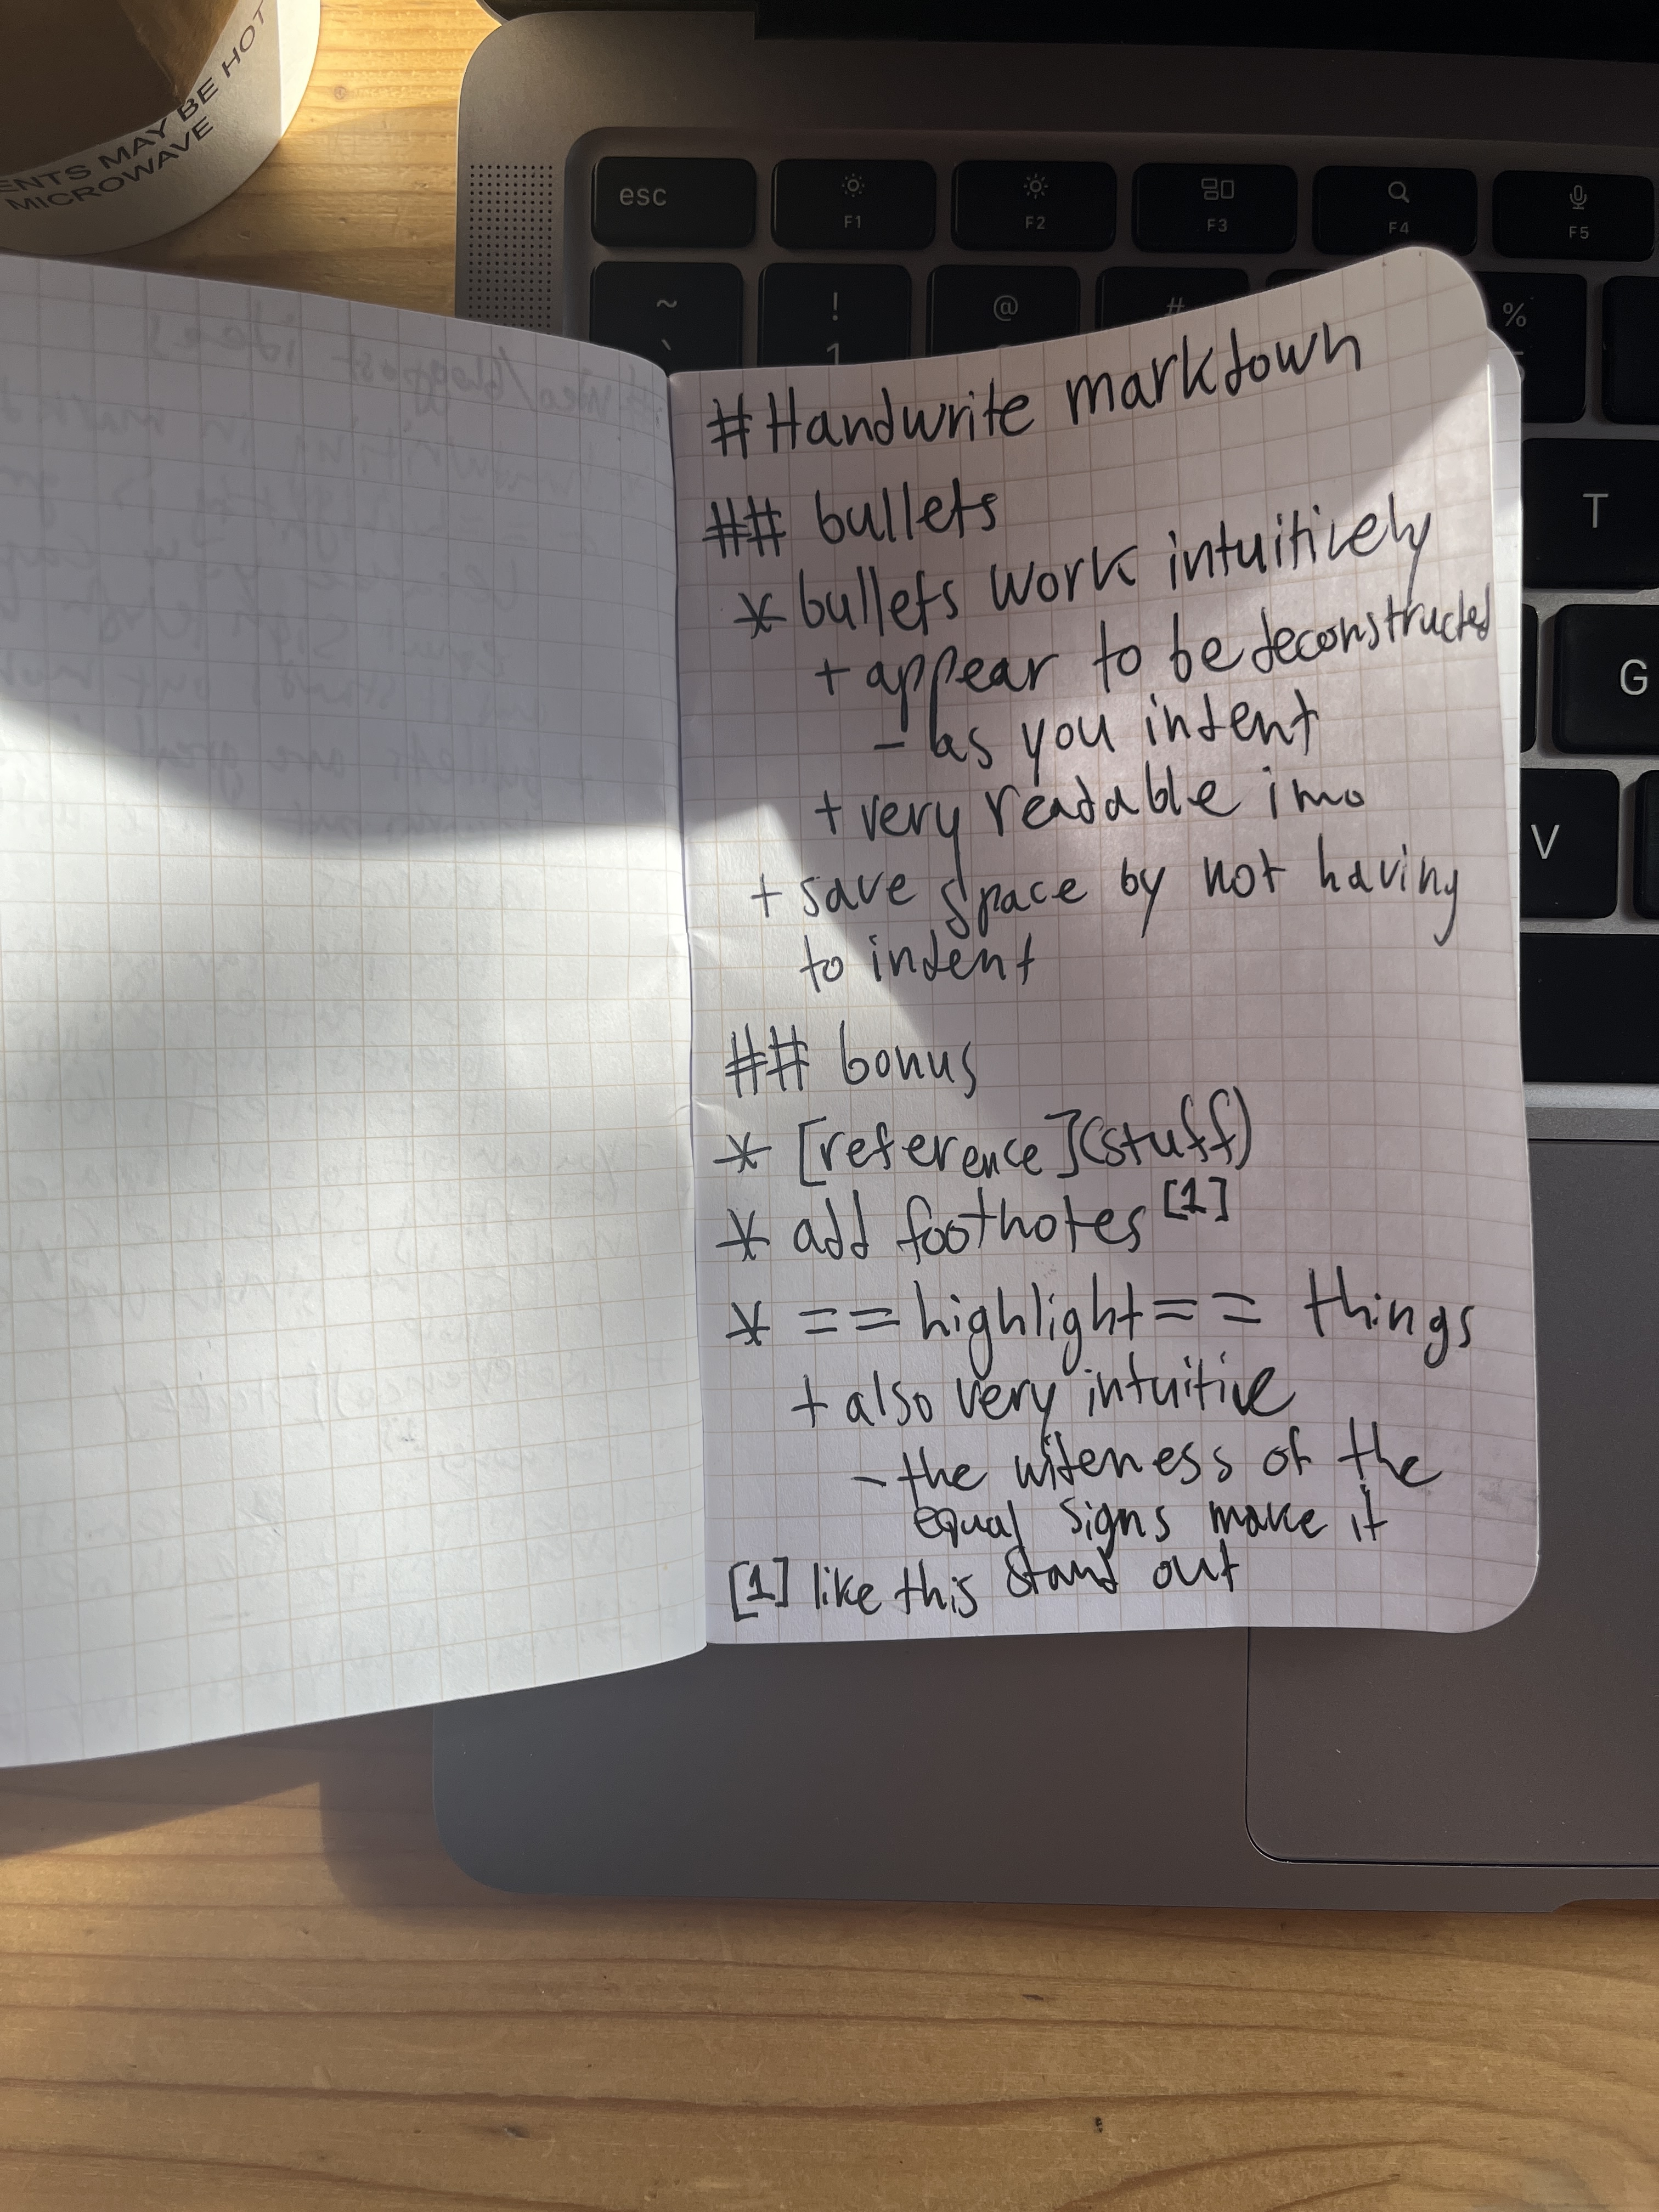 A handwritten note on grid paper demonstrating Inkdown features, placed on a laptop keyboard, with sunlight casting shadows across the page.